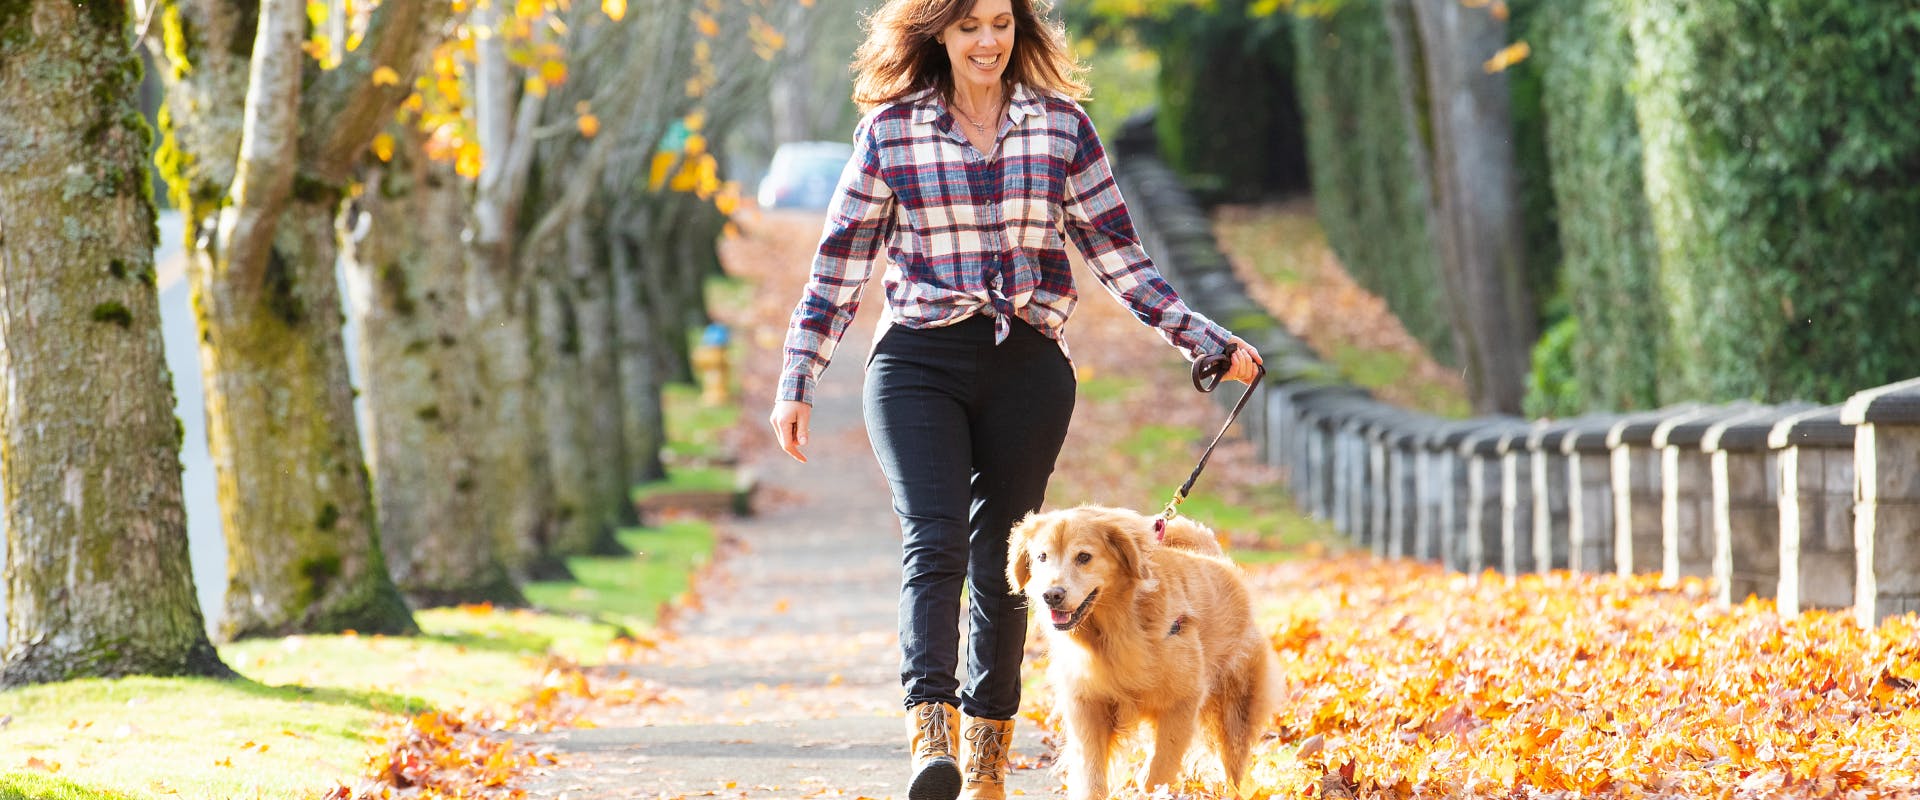 a woman on an autumn walk in a park with her elderly goldie on a leash